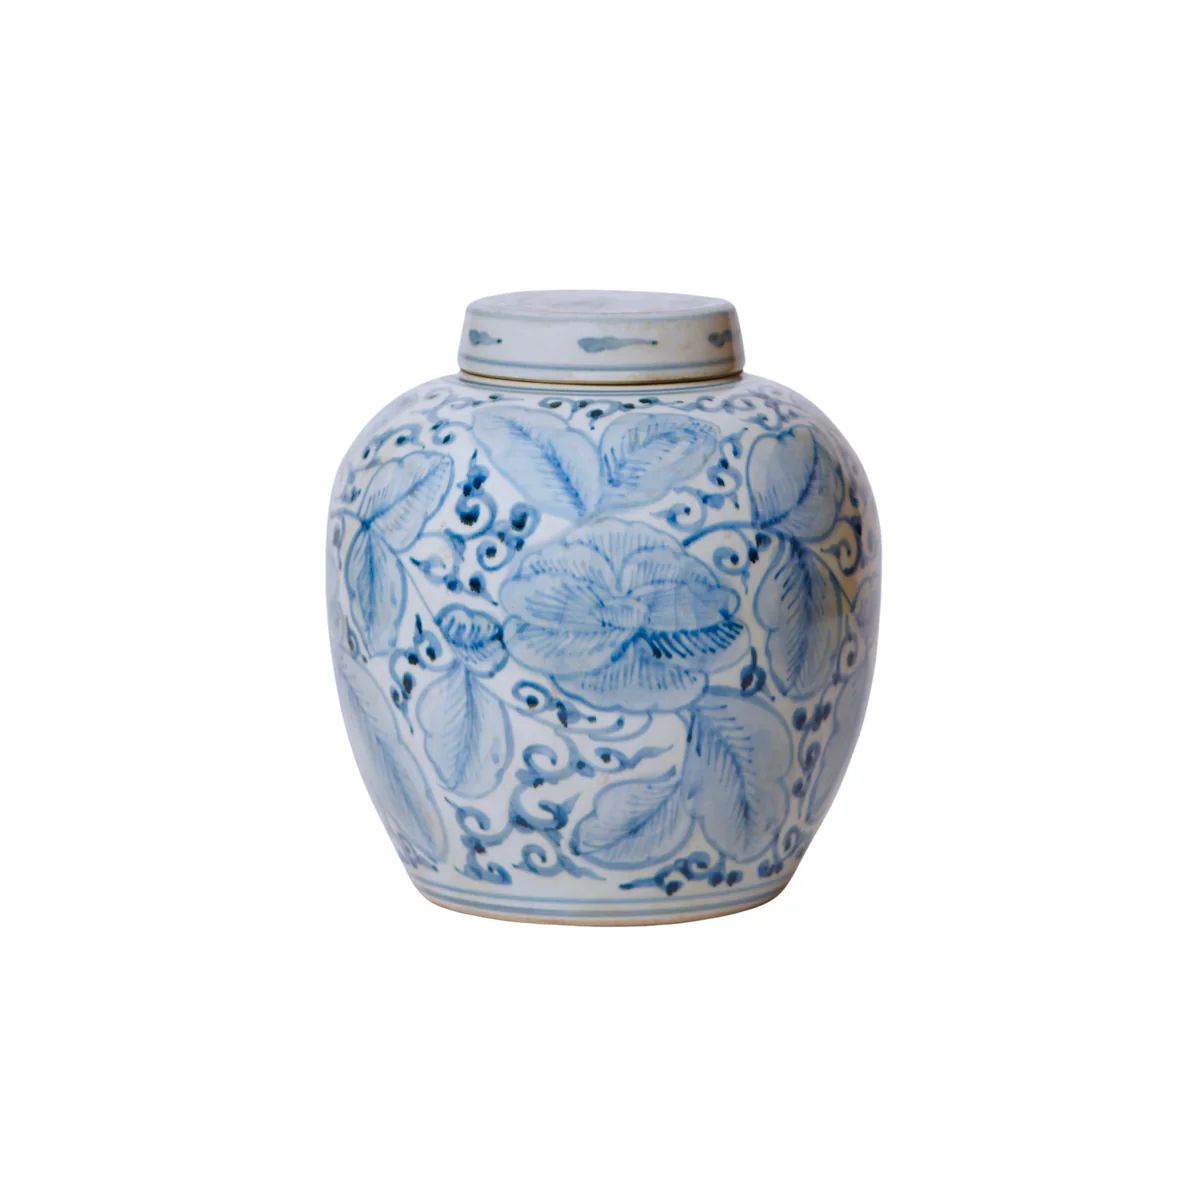 Lidded Blue and White Porcelain Rose Storage Jar | The Well Appointed House, LLC